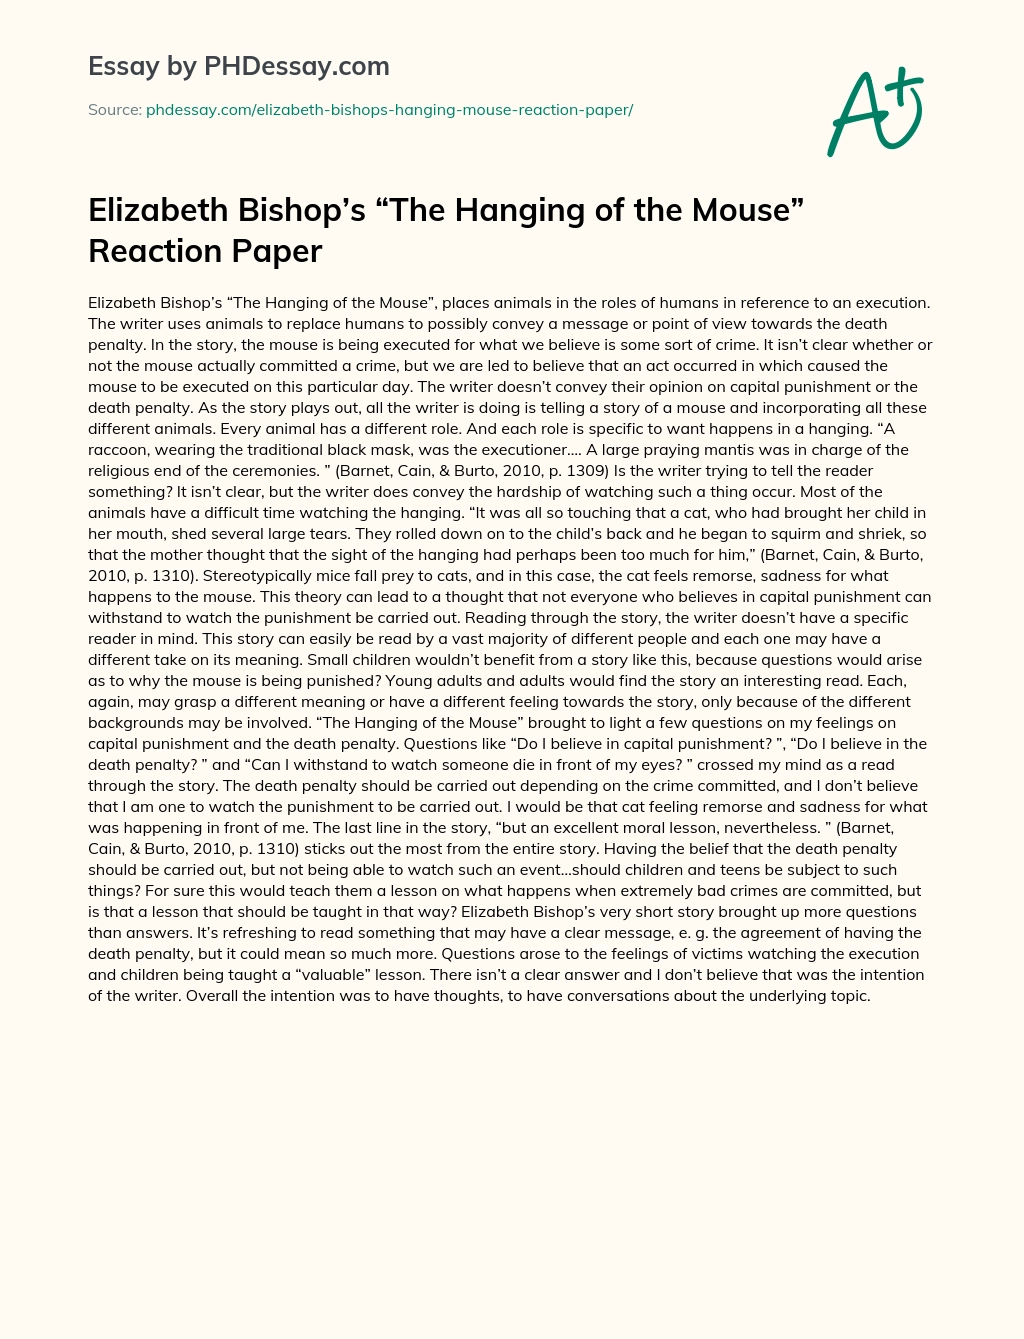 Elizabeth Bishop’s “The Hanging of the Mouse” Reaction Paper essay